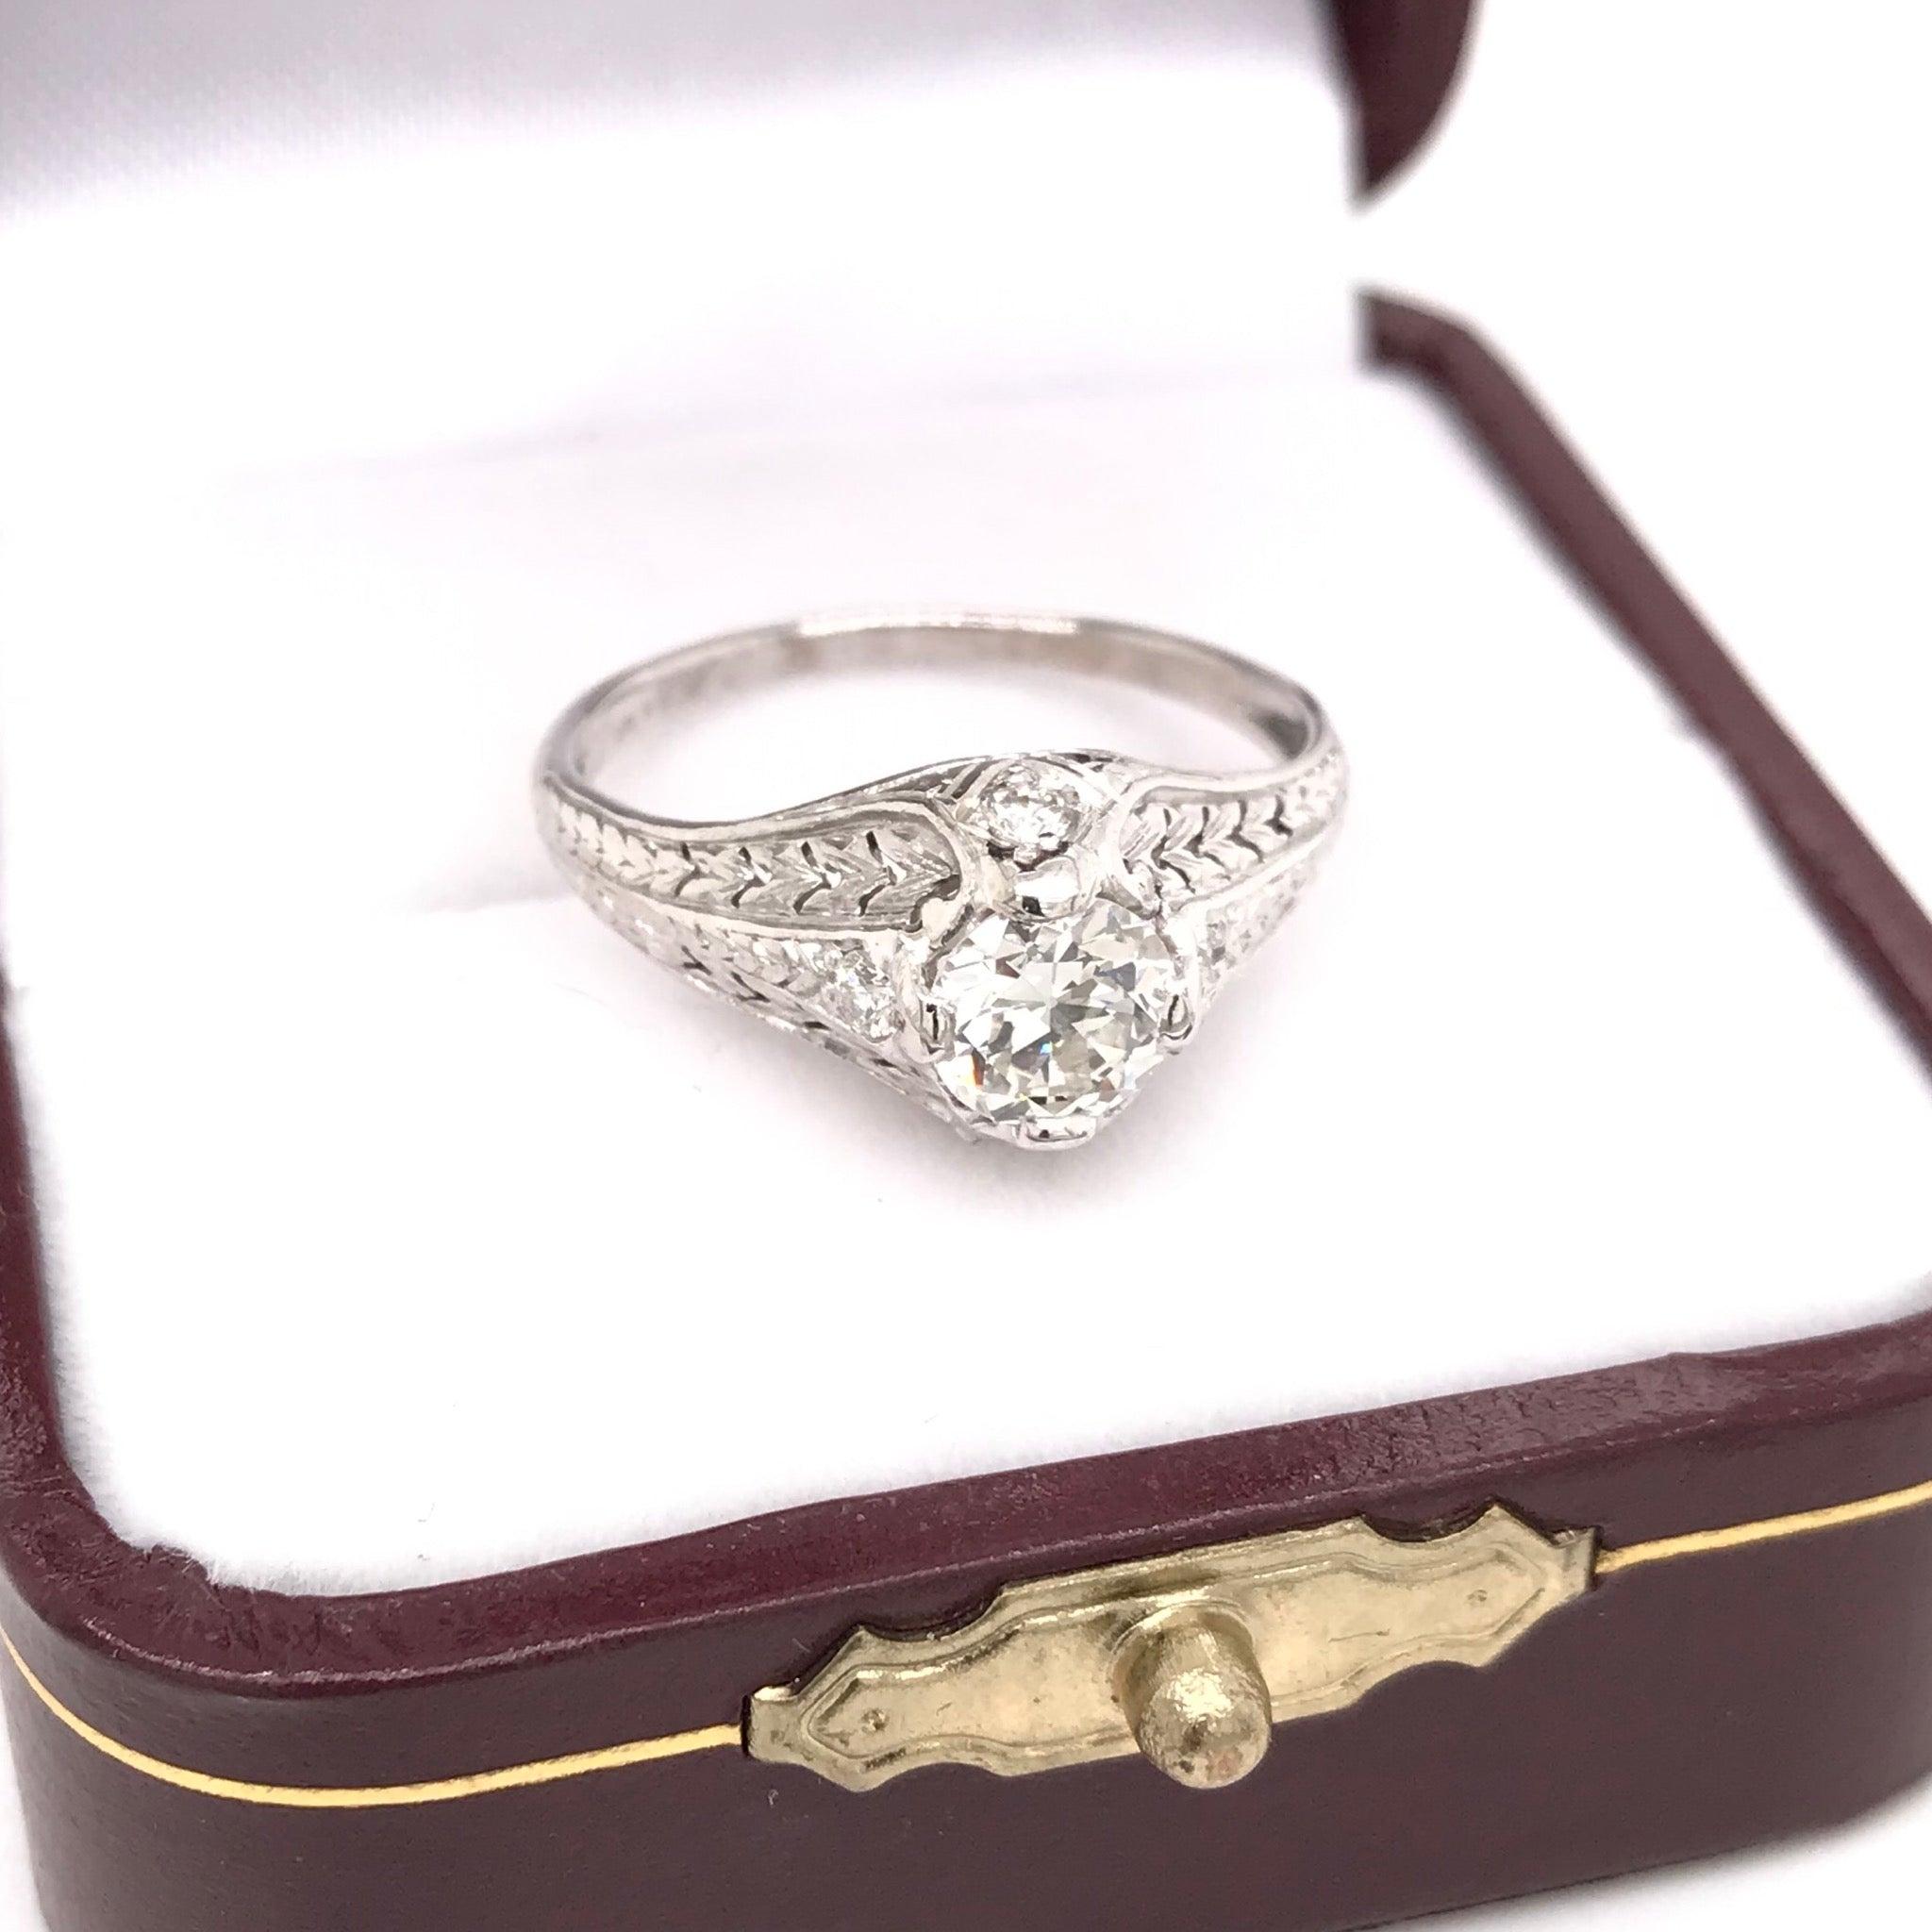 Edwardian 0.71 Carat Diamond and Platinum Solitaire Ring For Sale 4